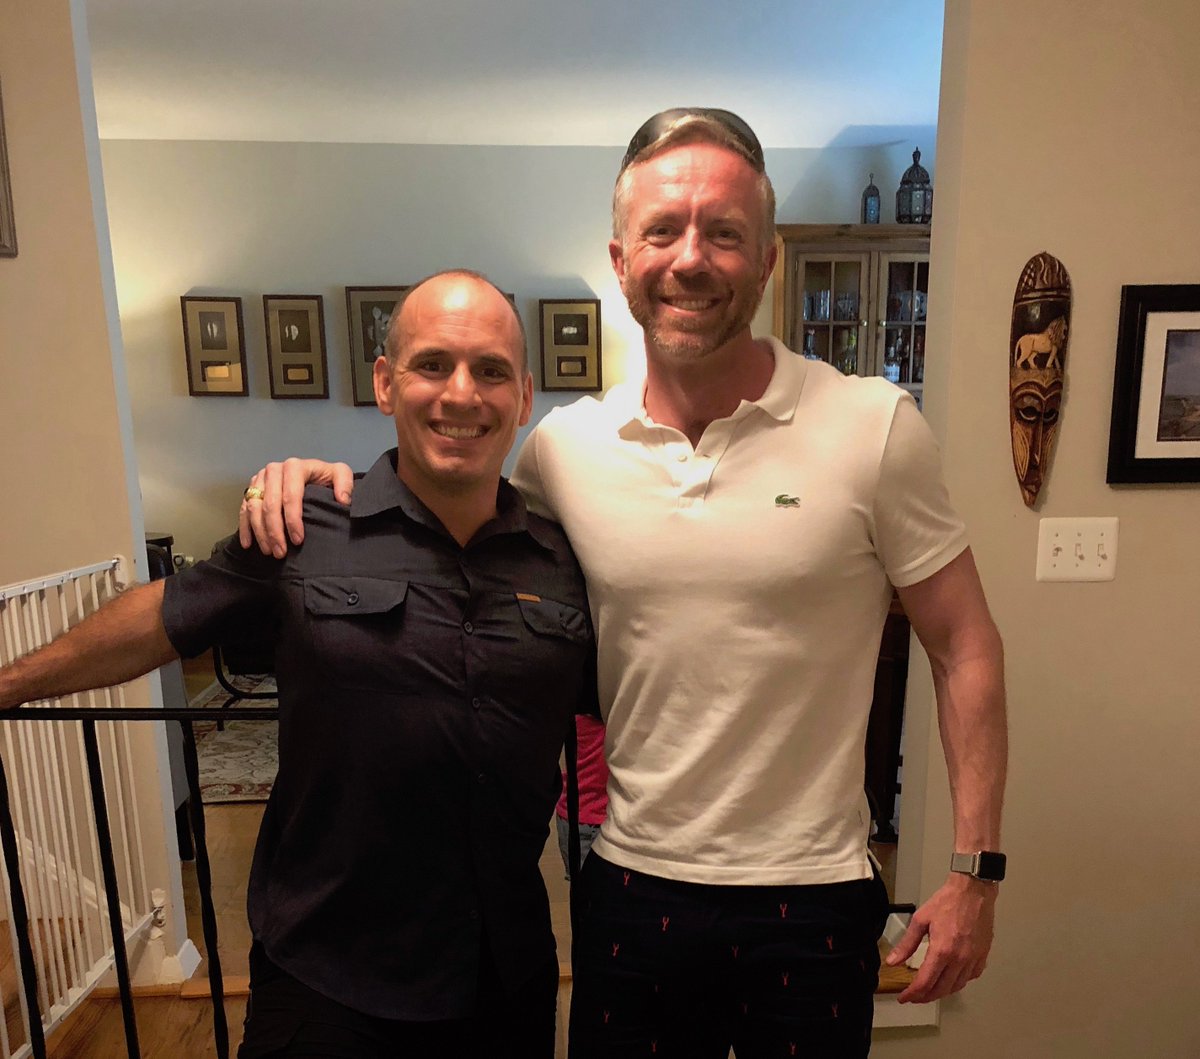 I first met Jason twenty years ago at Marine Corps Boot Camp. Writing that made me feel old. 20 years?!After going our separate ways, we both found our way to the Academy, reuniting as classmates. Been friends ever since.Happy Memorial Day, everyone!